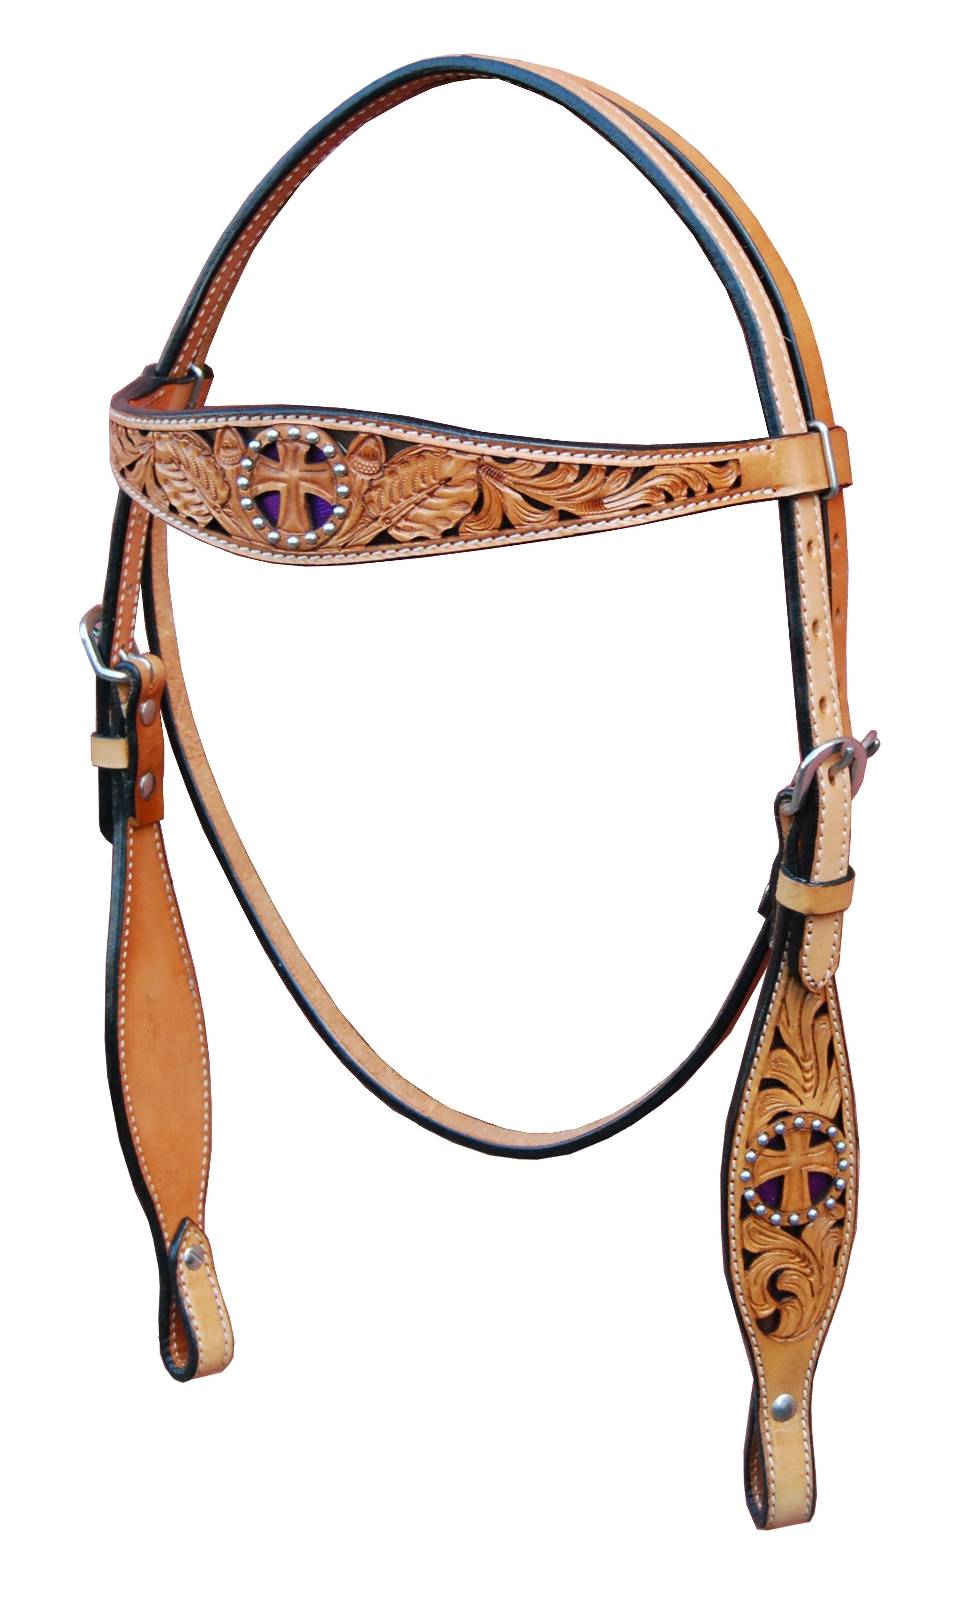 468921PUR HRSE Turn-Two Browband Headstall - St. Christopher sku 468921PUR HRSE